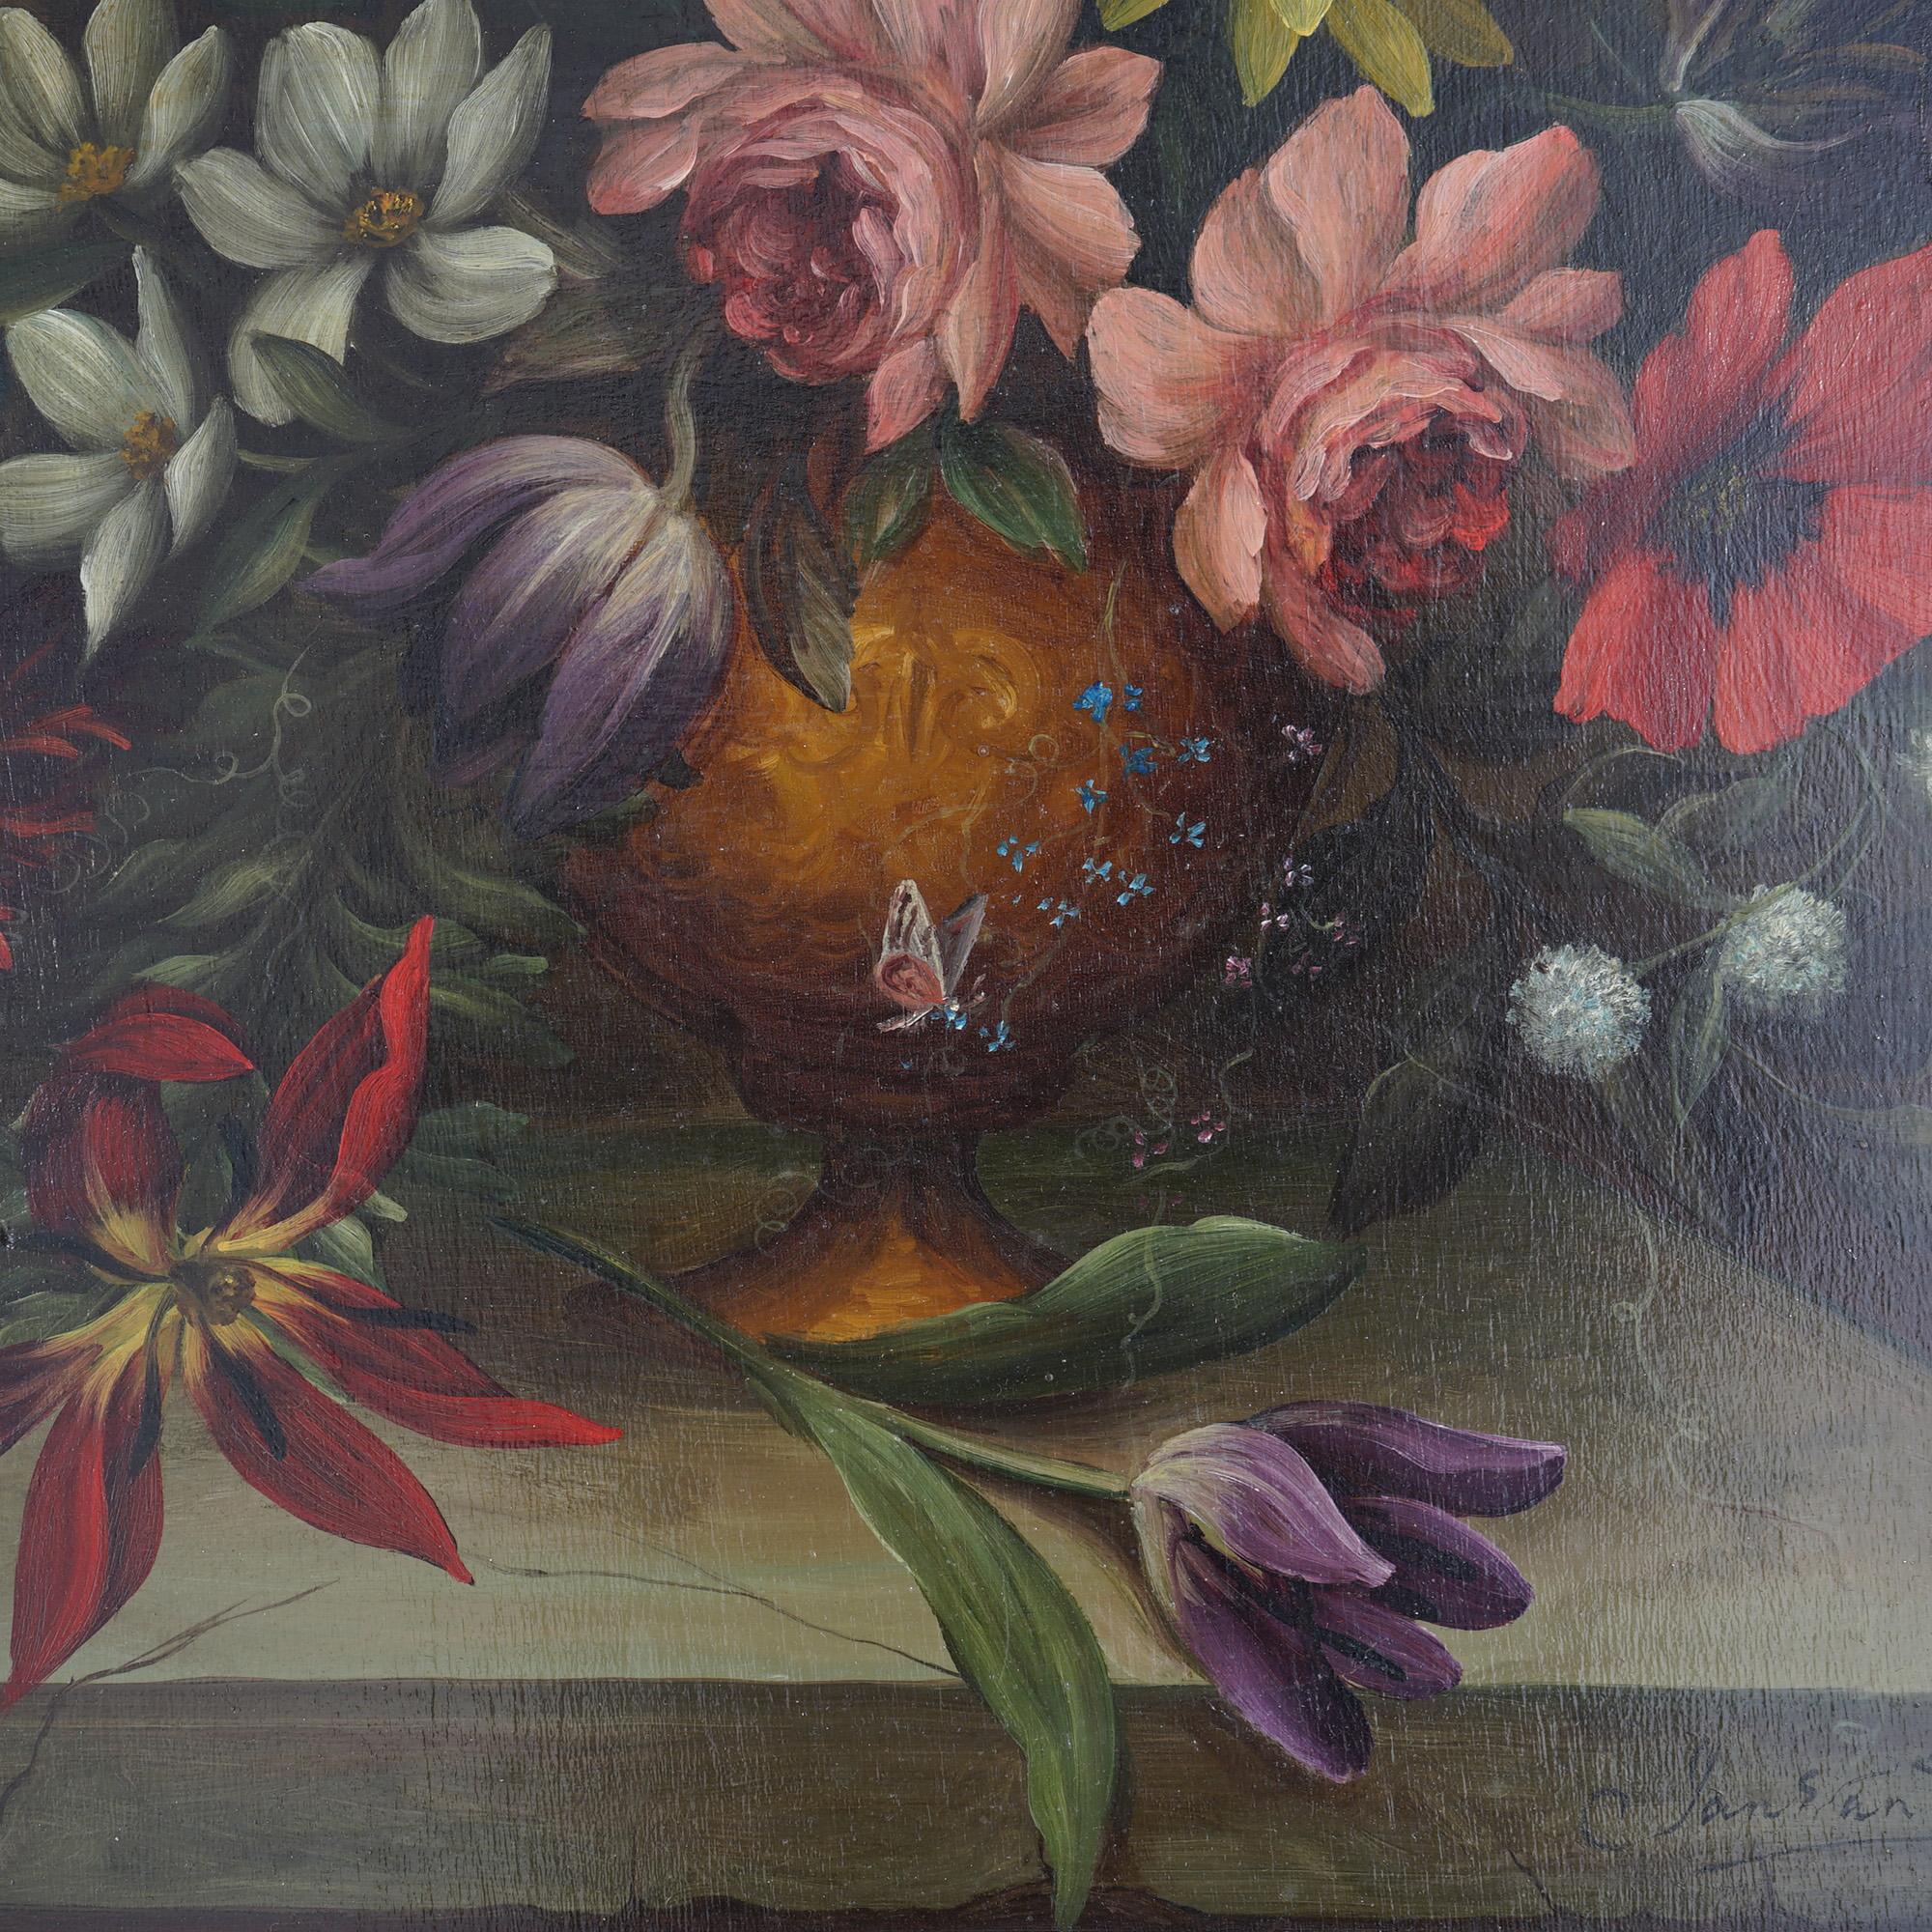 19th Century Antique Still Life with Flowers & Butterflies on a Stone Ledge by Jan Van Doust